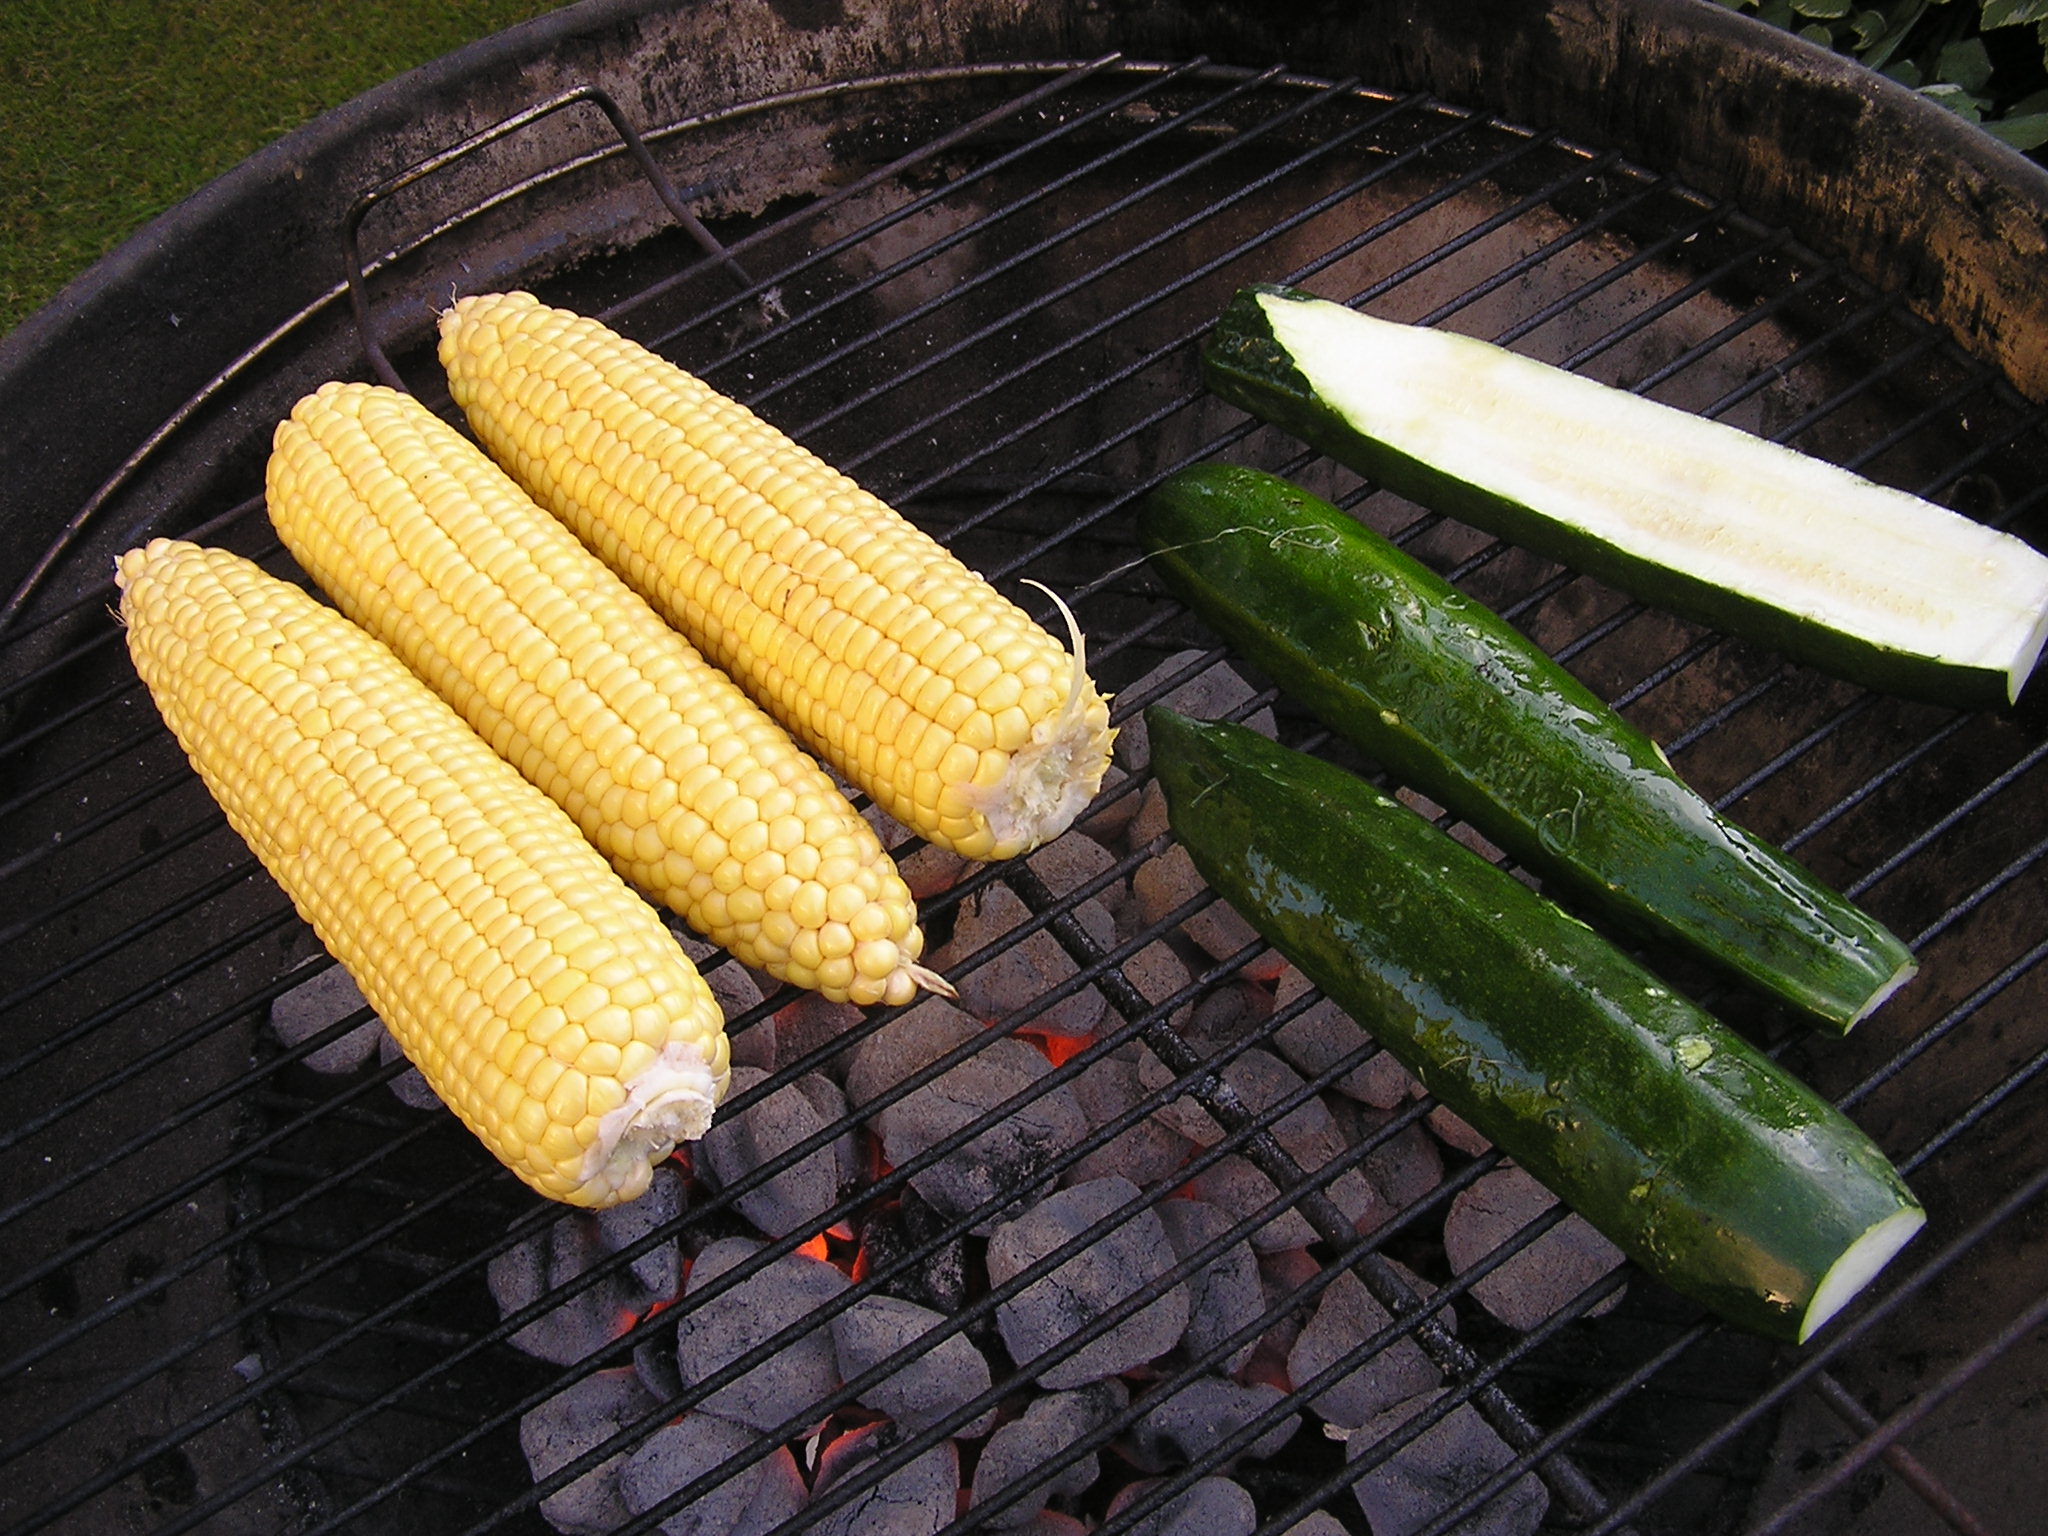 the corn and zucchini are on the barbecue grill